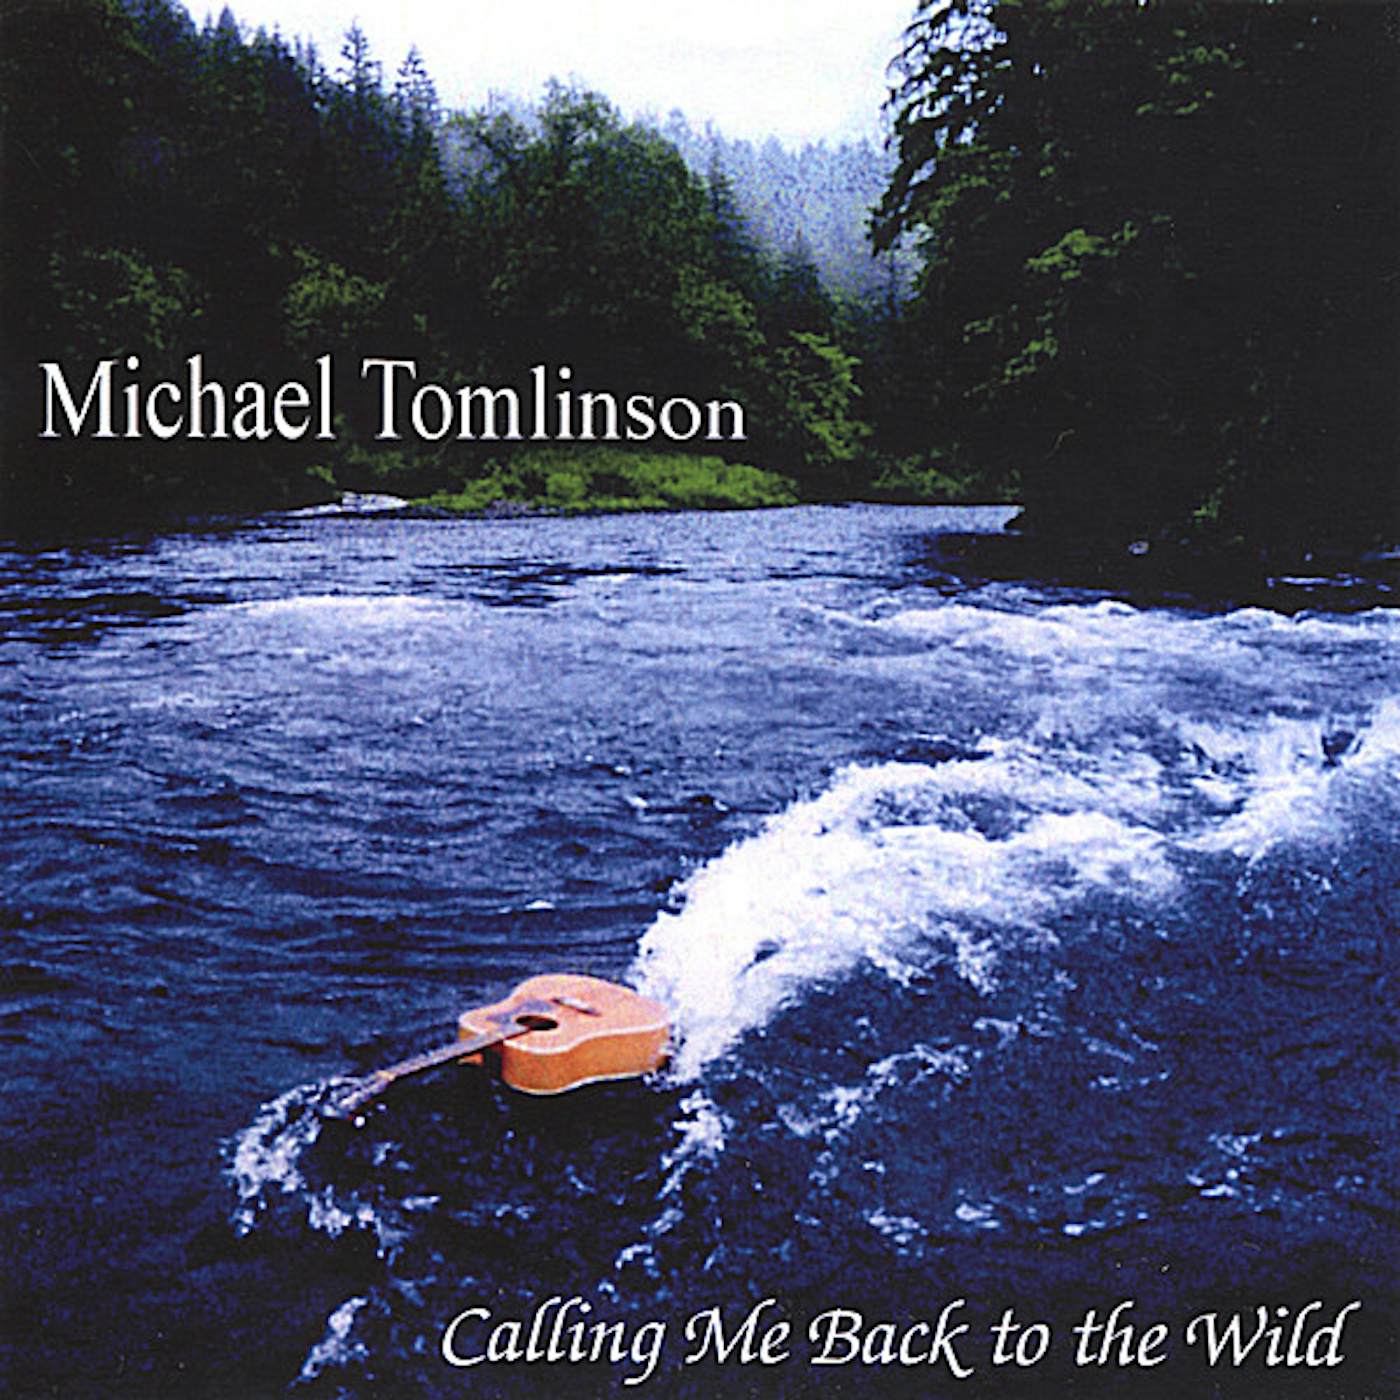 Michael Tomlinson CALLING ME BACK TO THE WILD CD